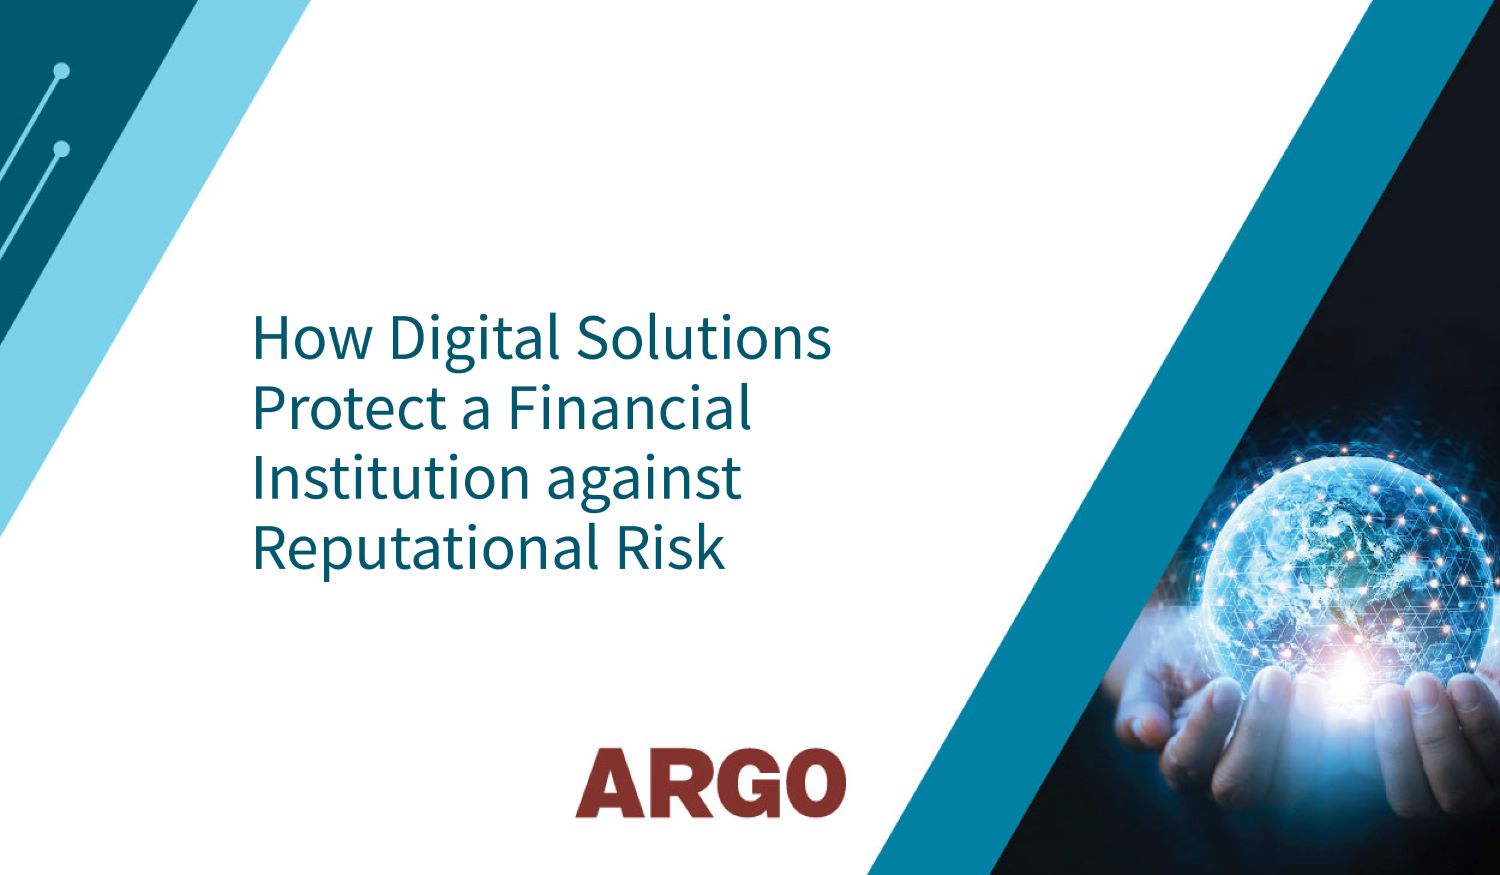 How Digital Solutions Protect a Financial Institution against Reputational Risk 